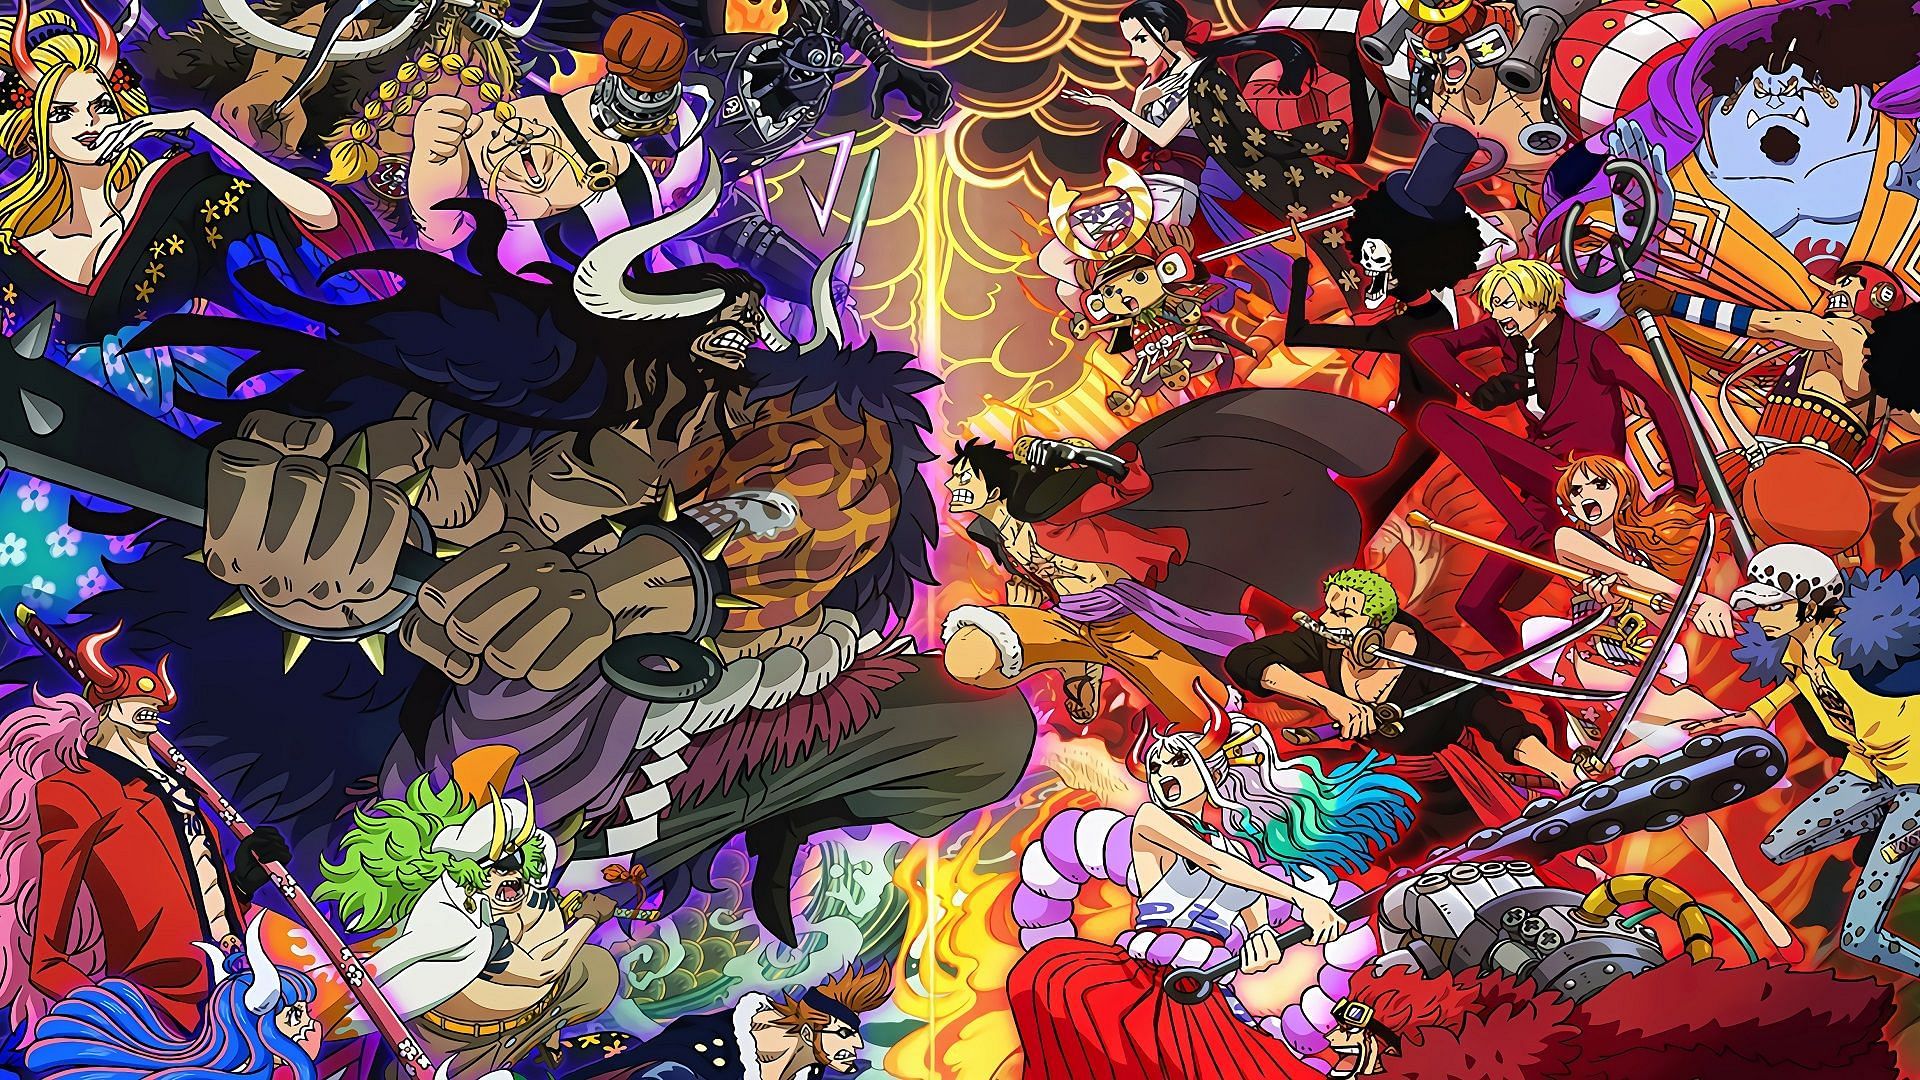 This battle royale may surpass even the fight that took place in Wano (Image via Toei Animation, One Piece)